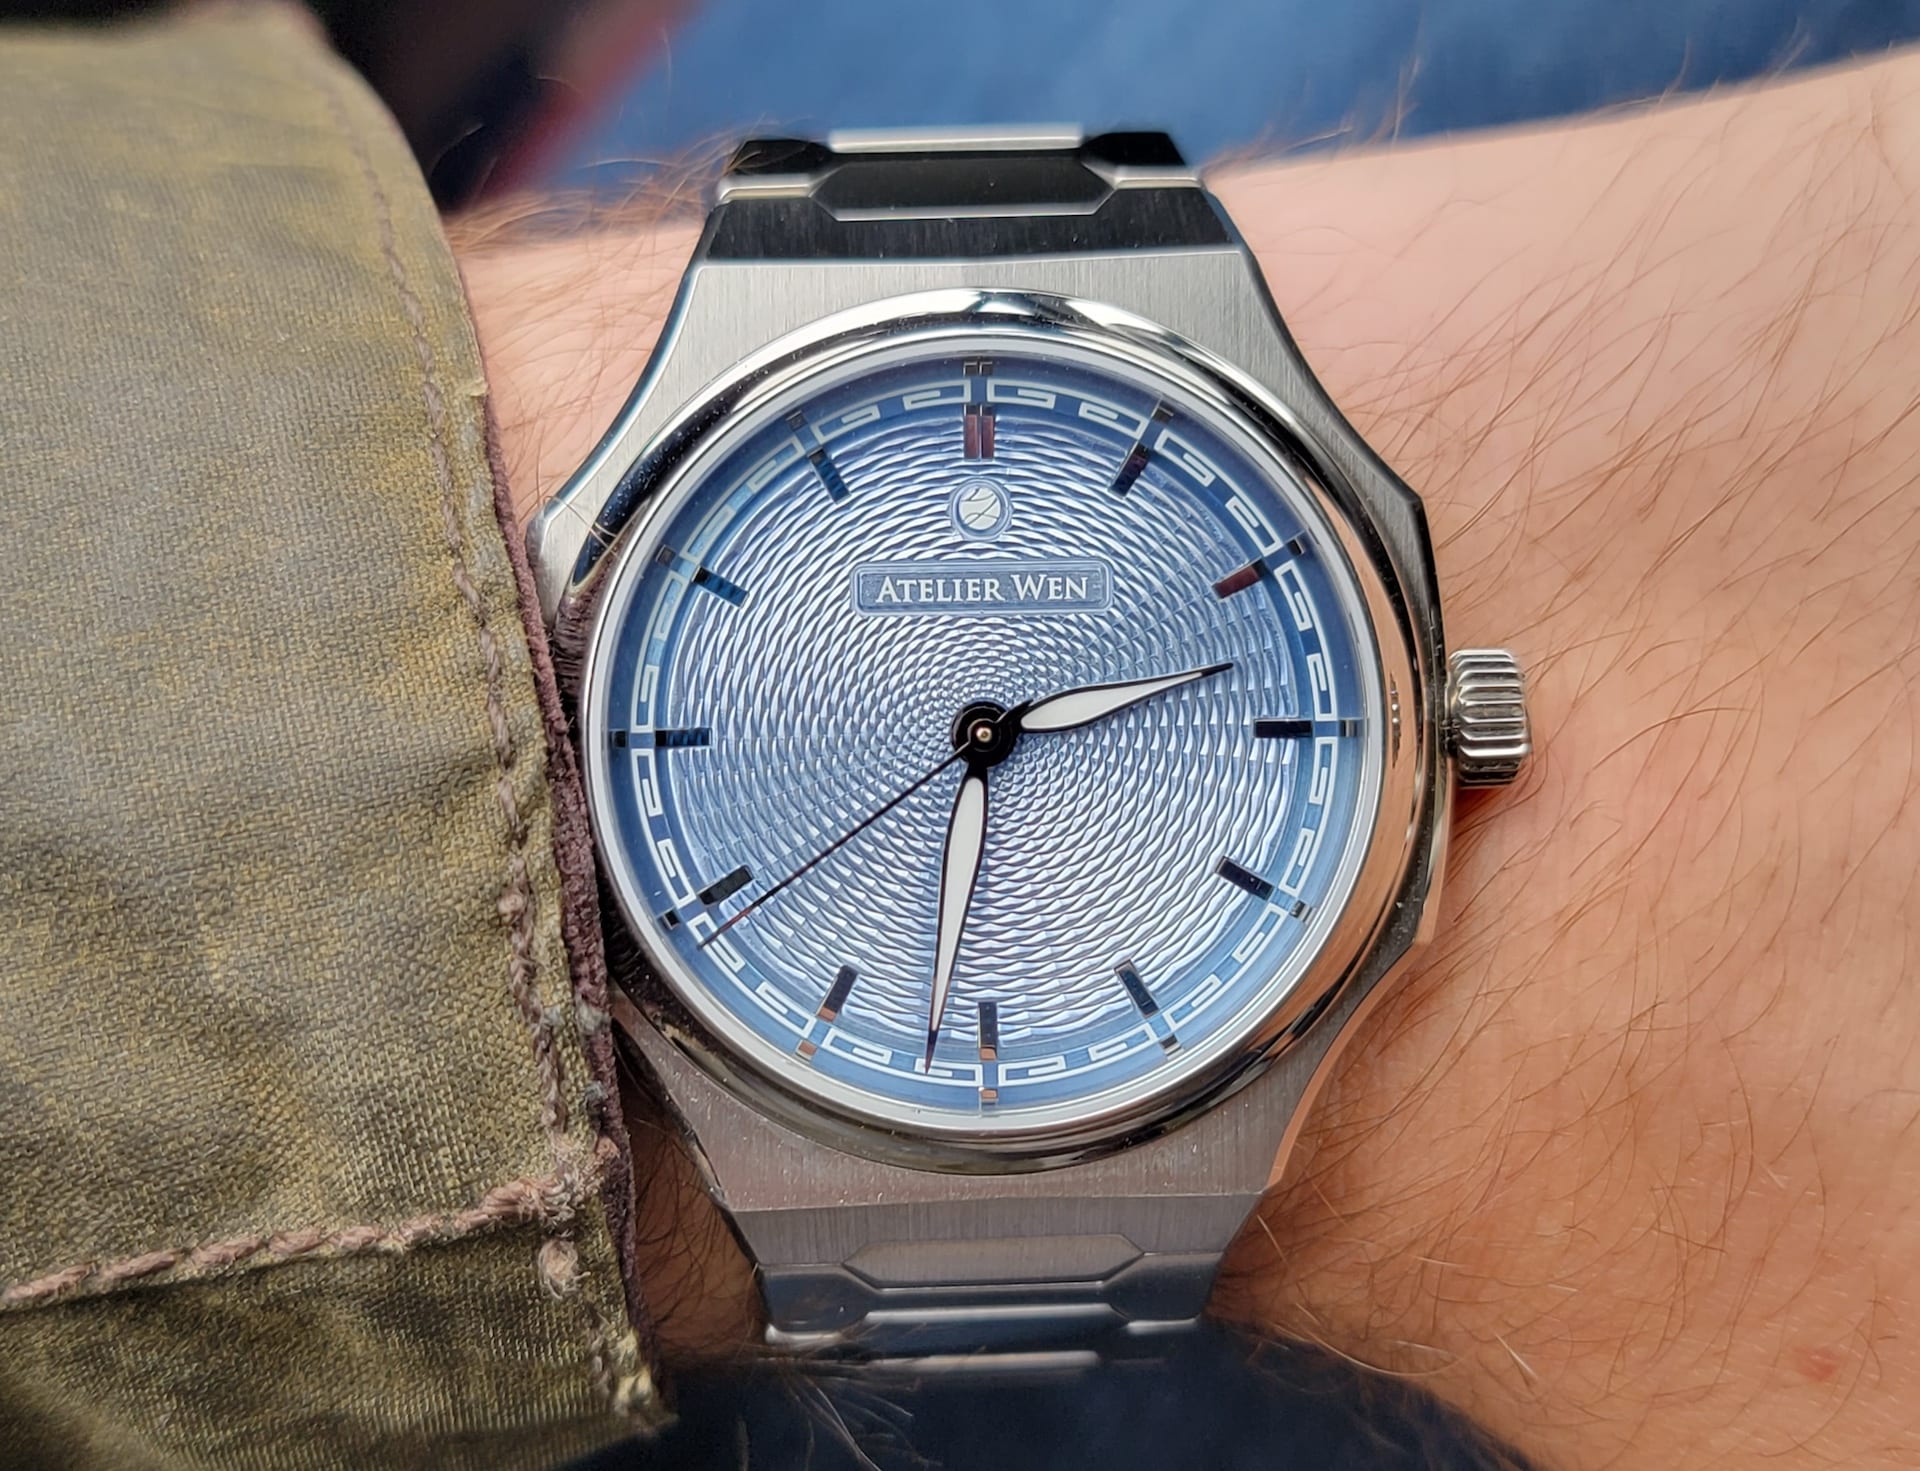 Atelier Wen Perception Review: An Introduction To Chinese Luxury Watches